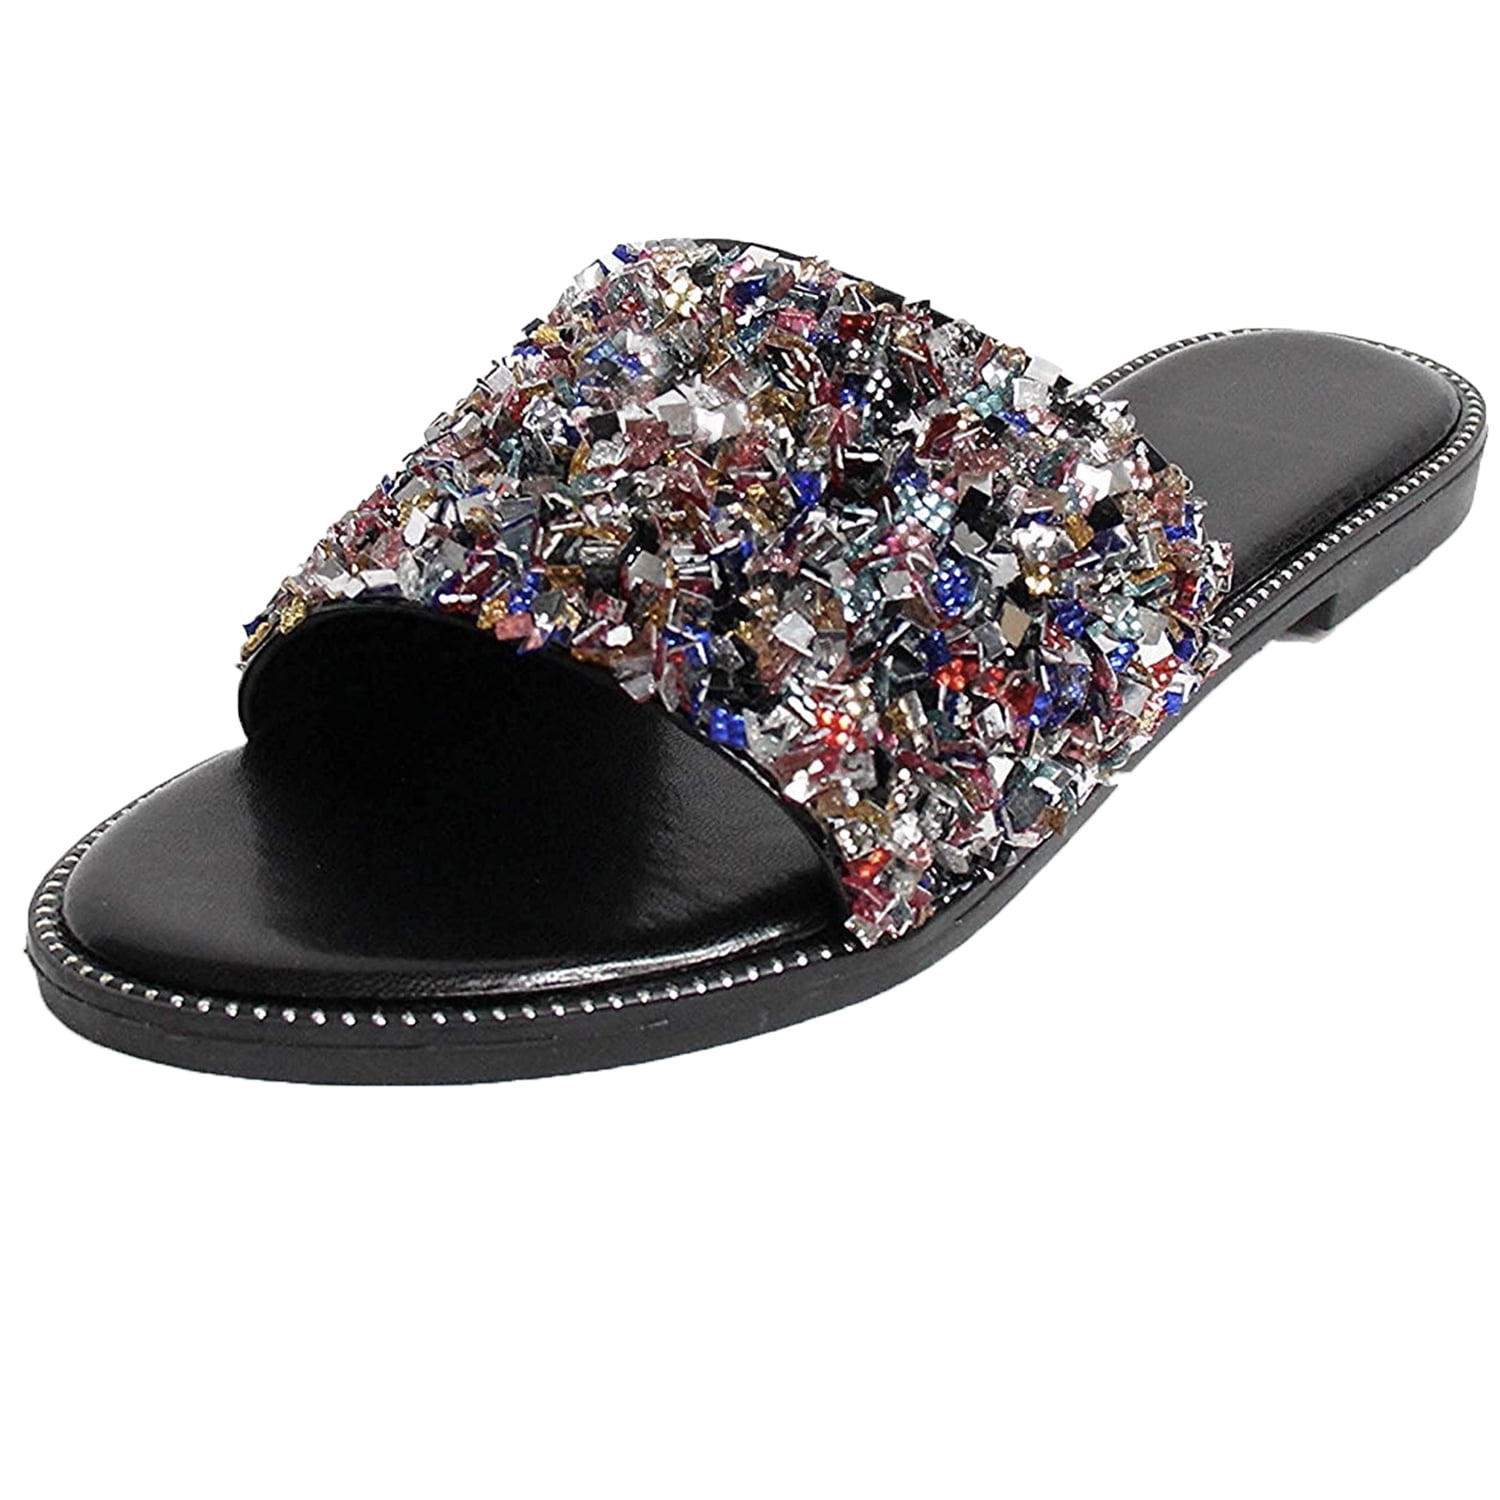 LADIES WOMEN GLITTERING SLIDERS SLIPPERS SPARKLY SANDALS SHOES BEACH PARTY MULES 